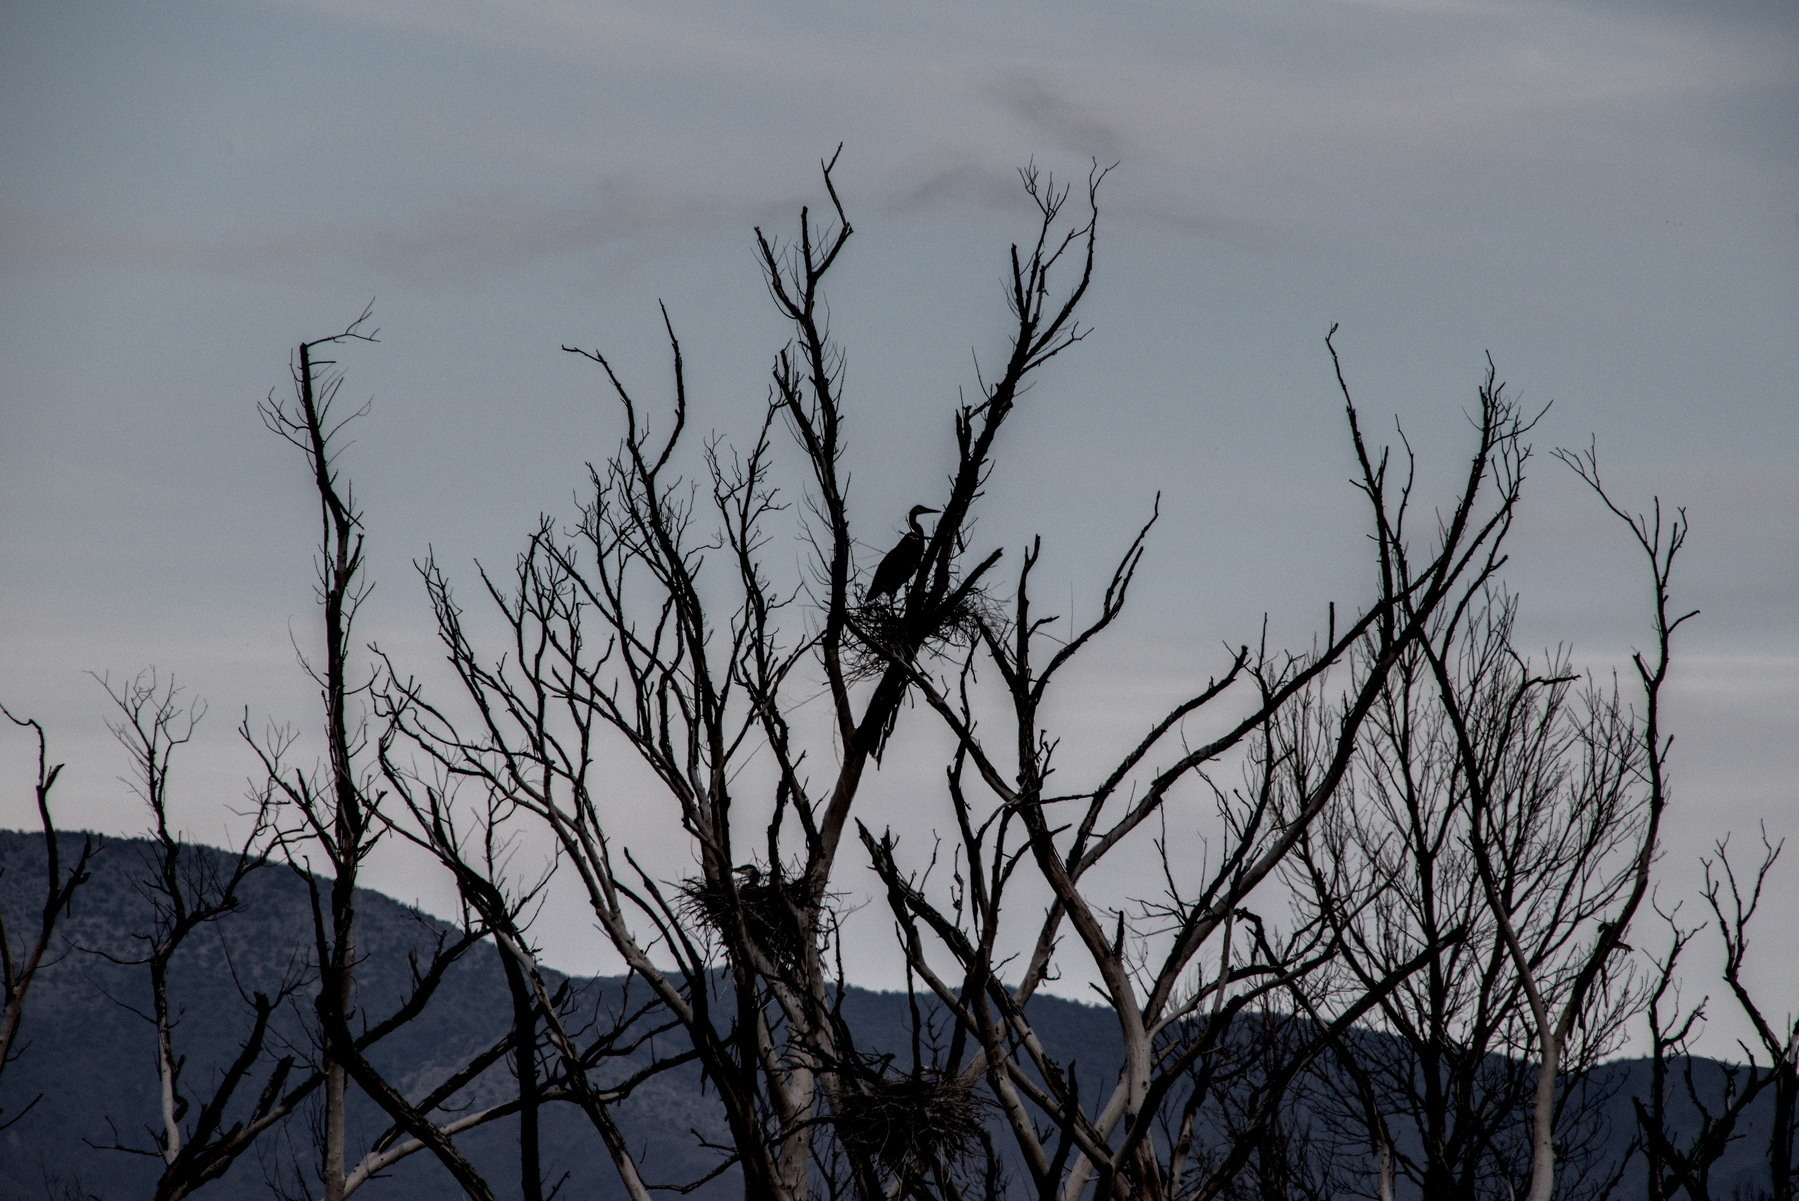 Bare tree-tops with two Great Blue Herons, each on its own nest.